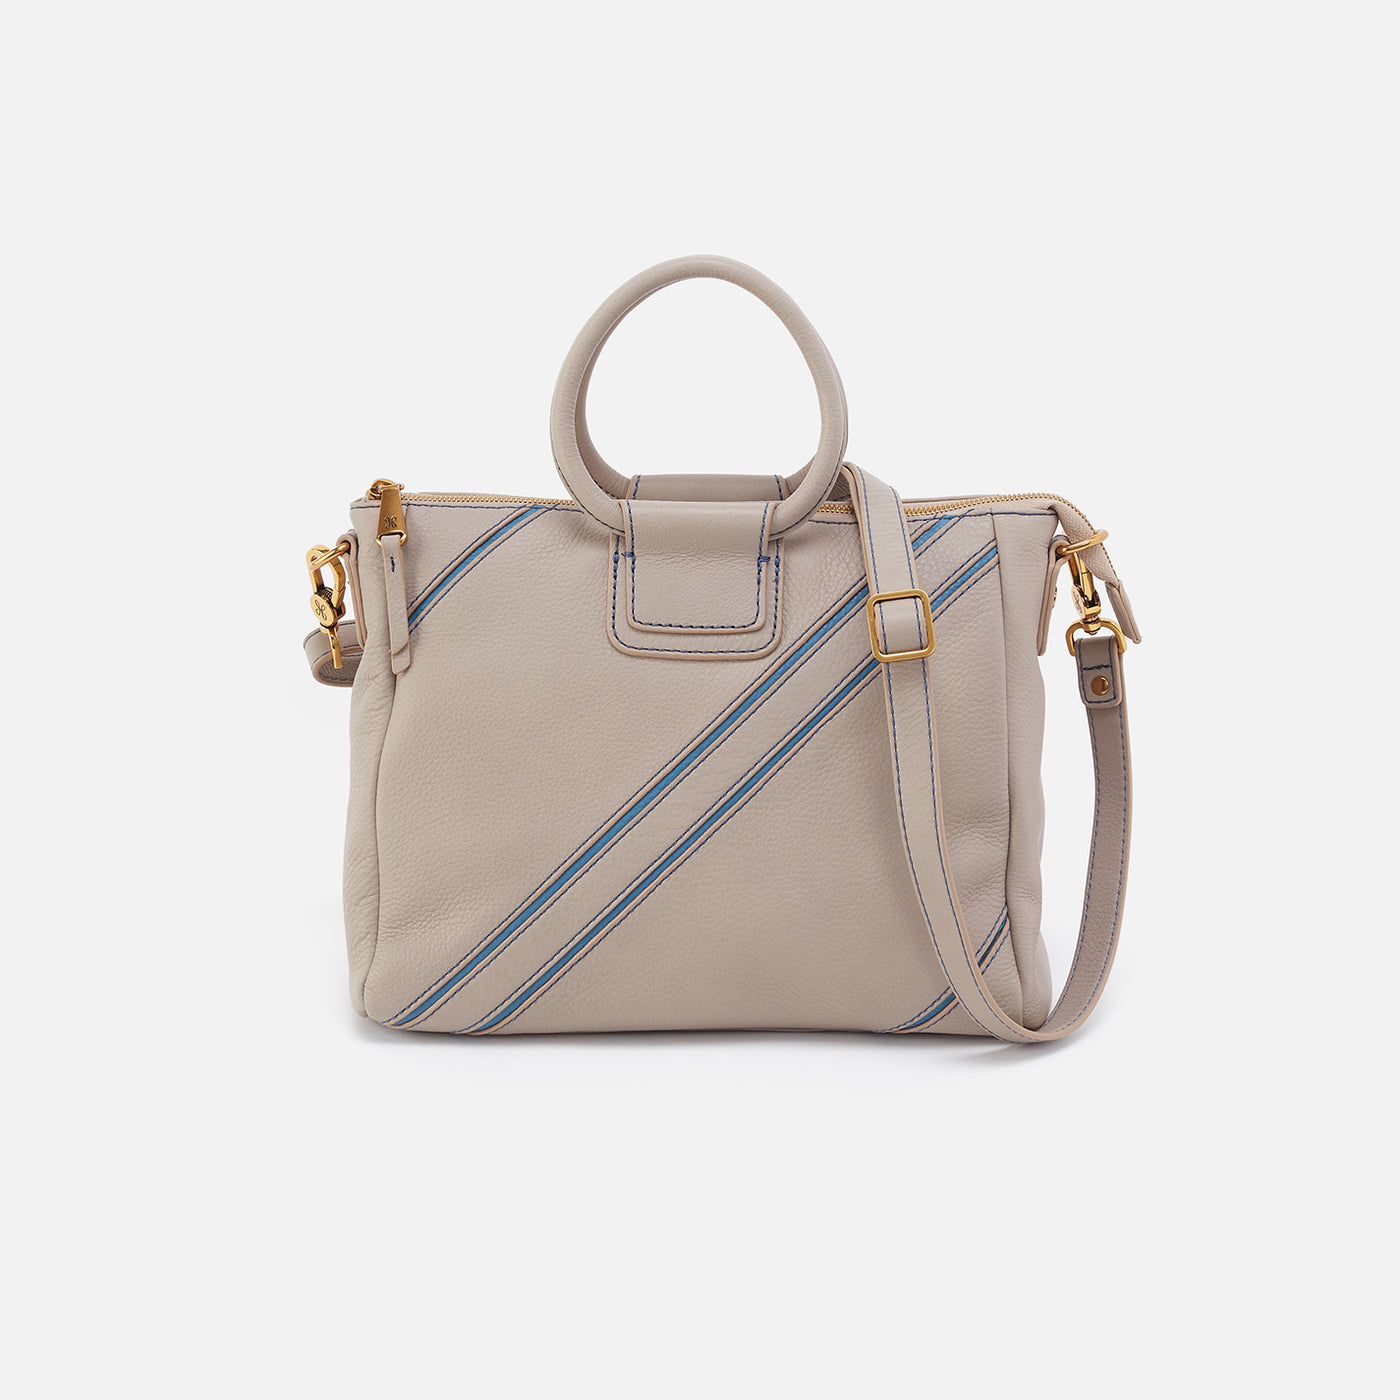 Sheila Medium Satchel in Pebbled Leather - Taupe